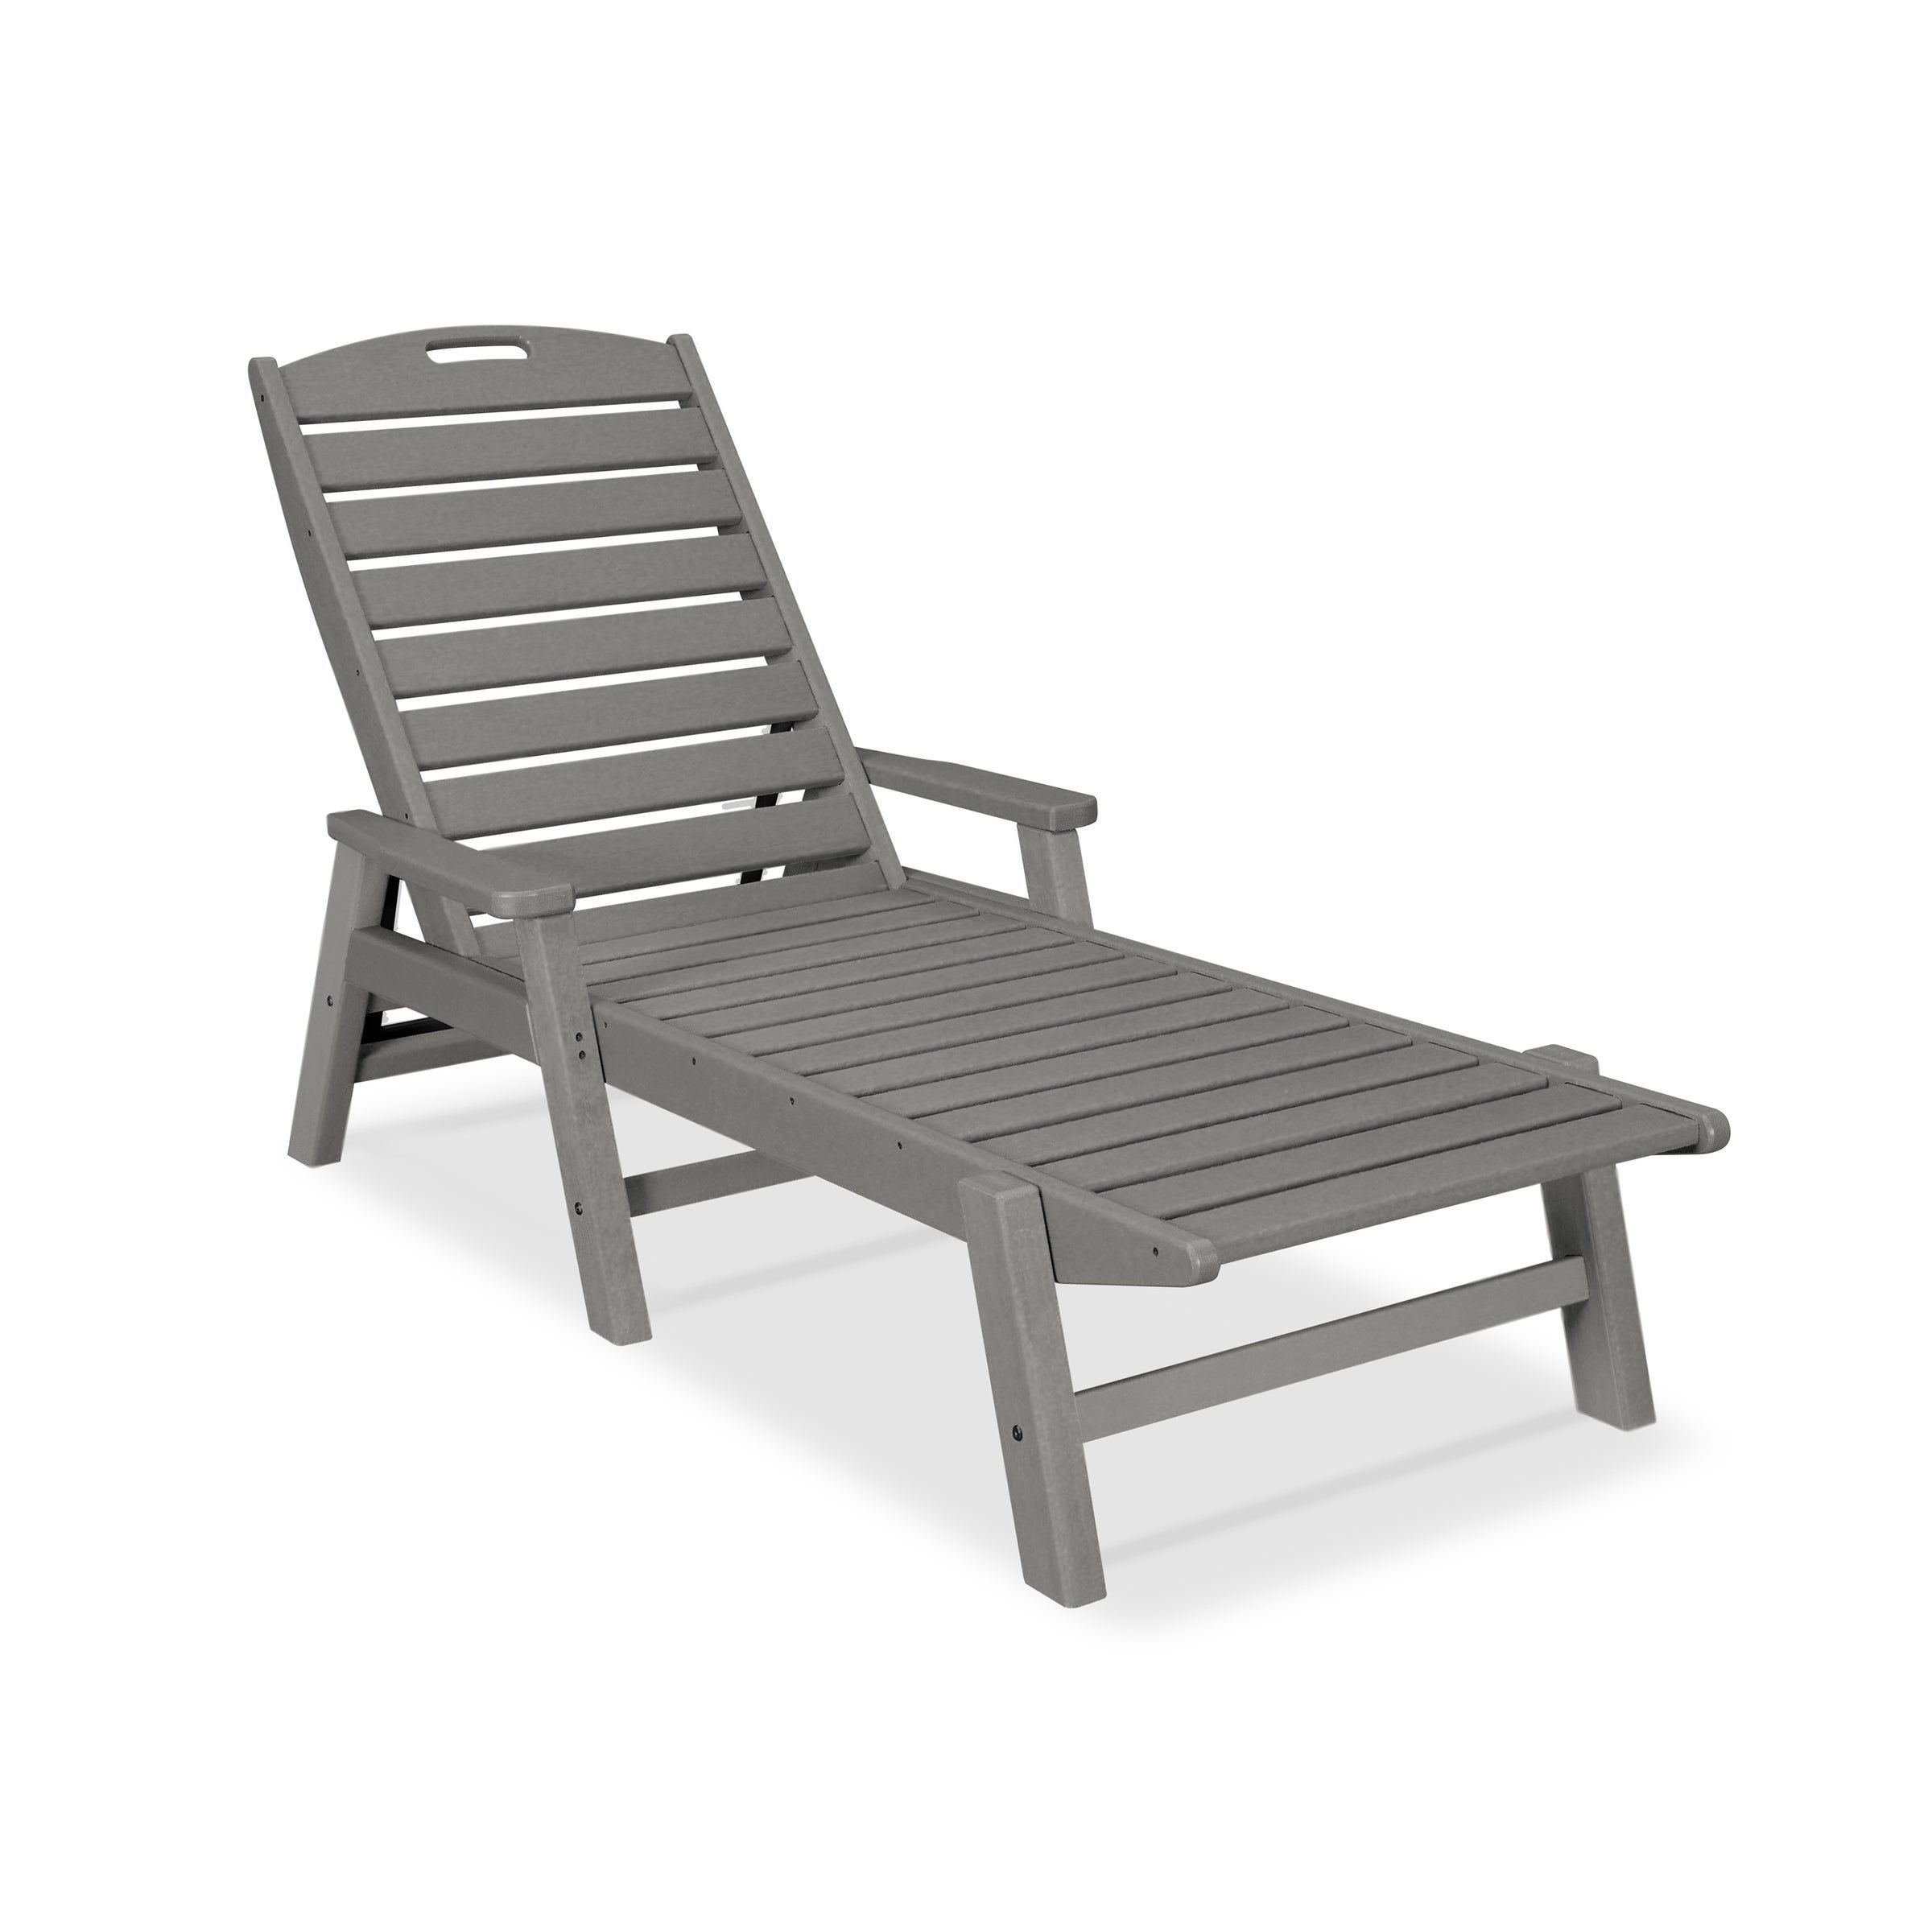 Popular Polywood® Nautical Outdoor Chaise Lounge With Arms, Stackable, Ncc2280 Throughout Stackable Nautical Outdoor Chaise Lounges (View 7 of 25)